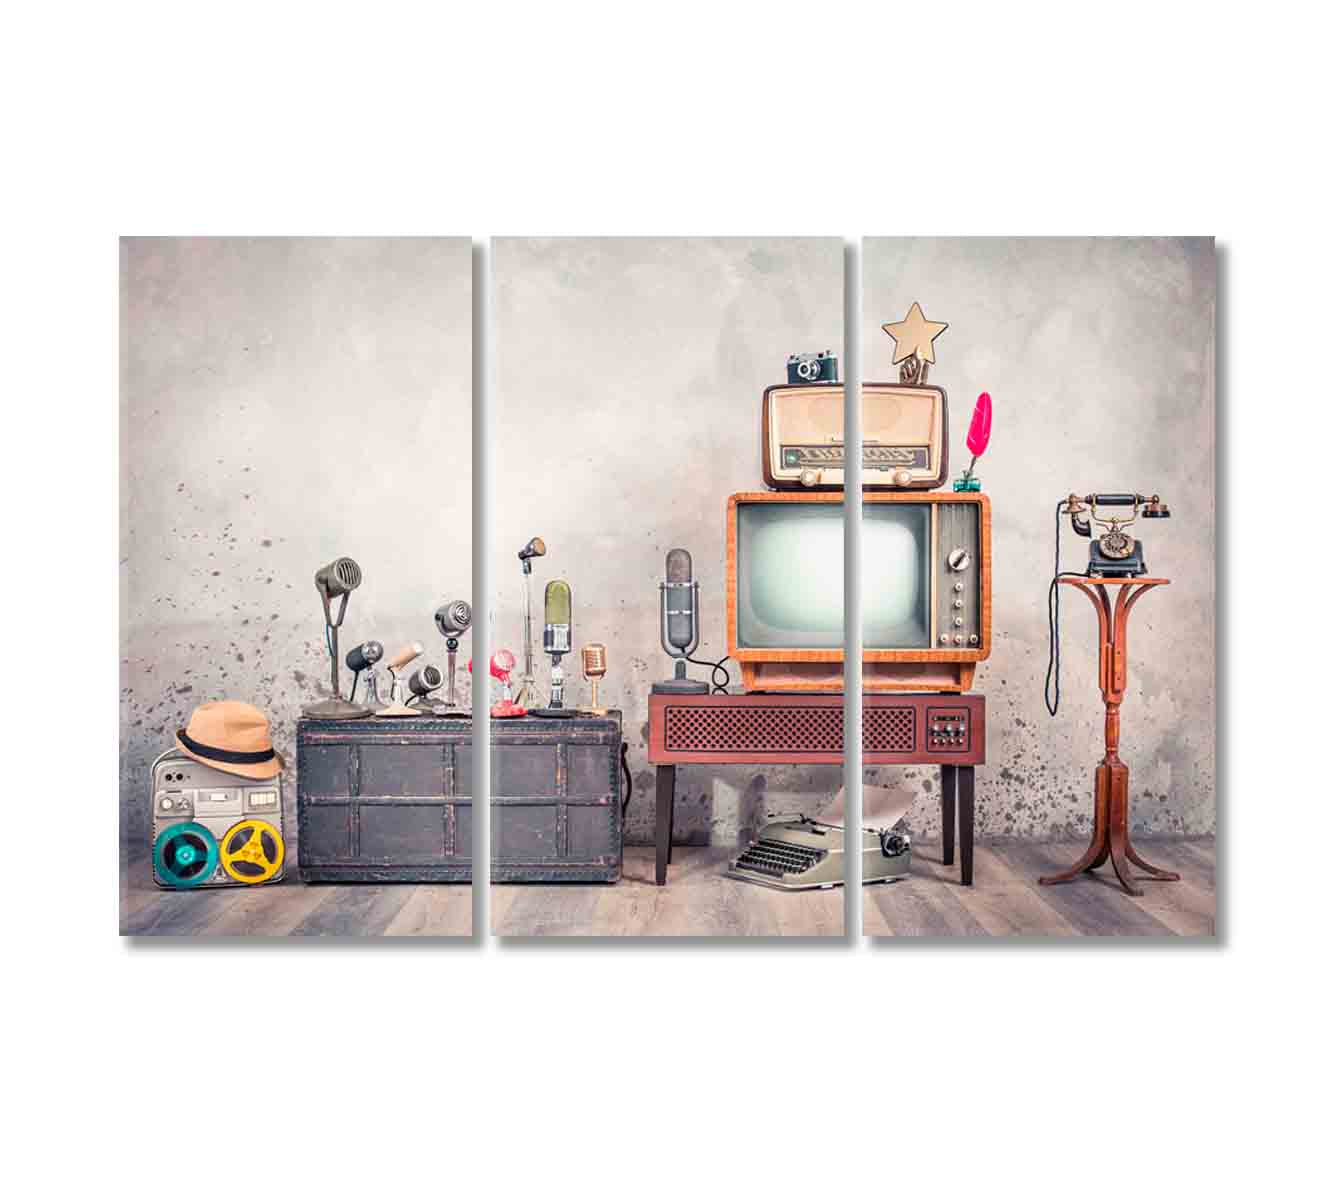 Retro TV and Old Microphones Vintage Style Canvas Print-Canvas Print-CetArt-3 Panels-36x24 inches-CetArt